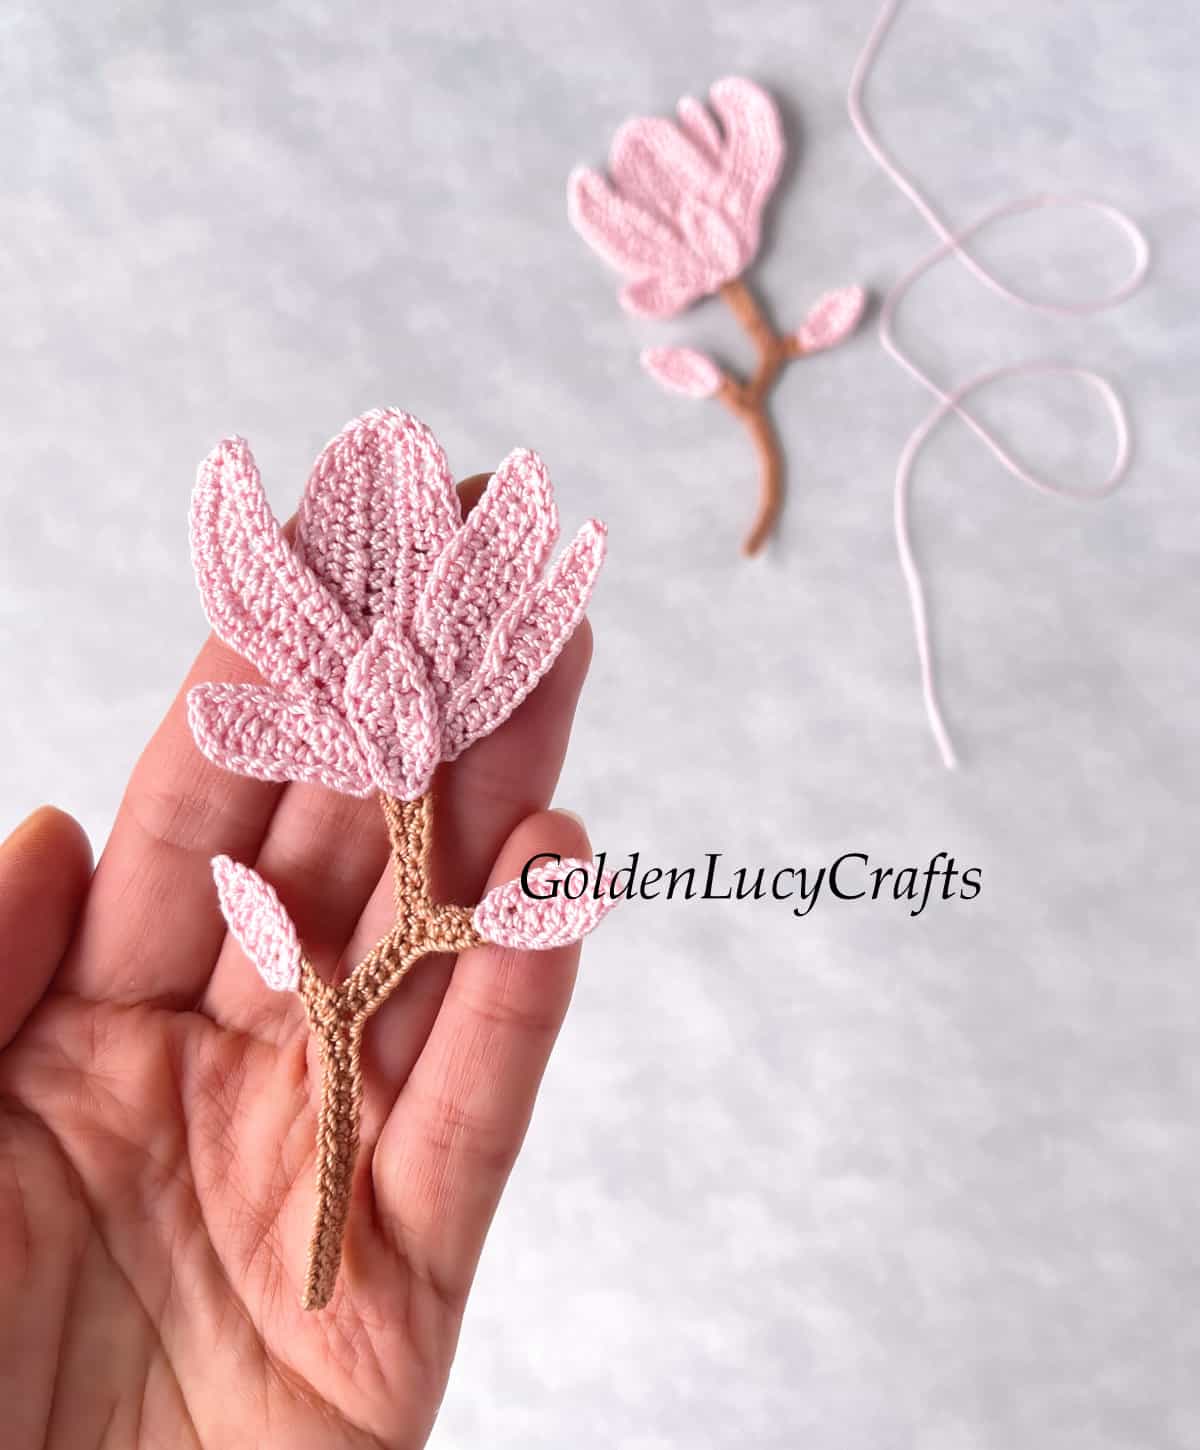 Crochet pink magnolia applique in the palm of a hand.